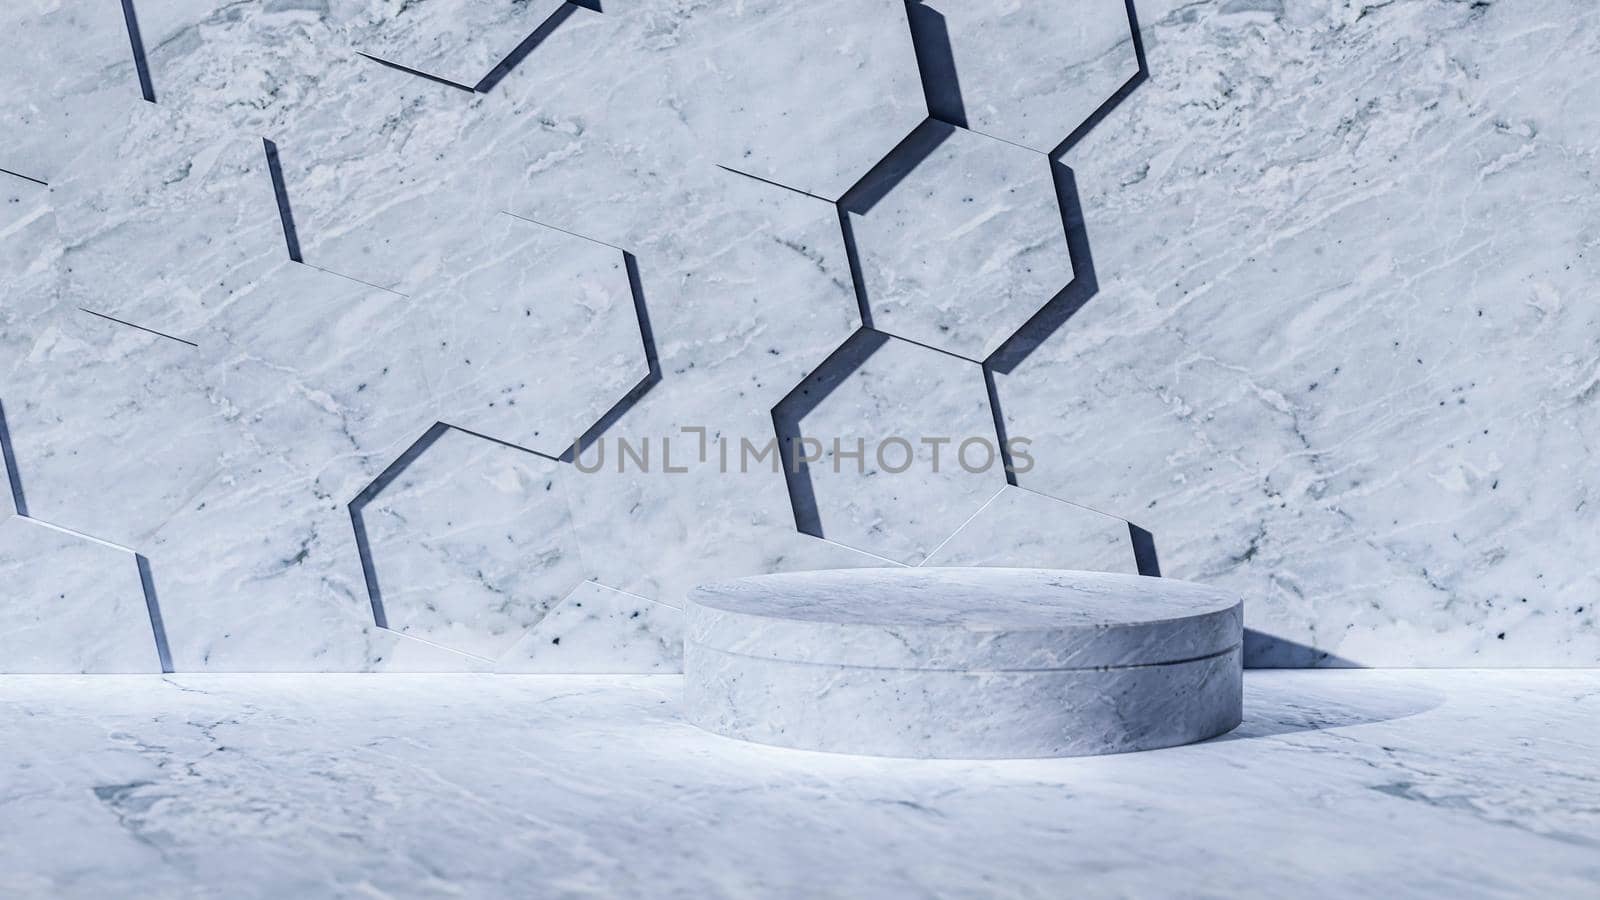 A 3d rendering image of white marble product display on white marble floor and wall.  by Kankliang